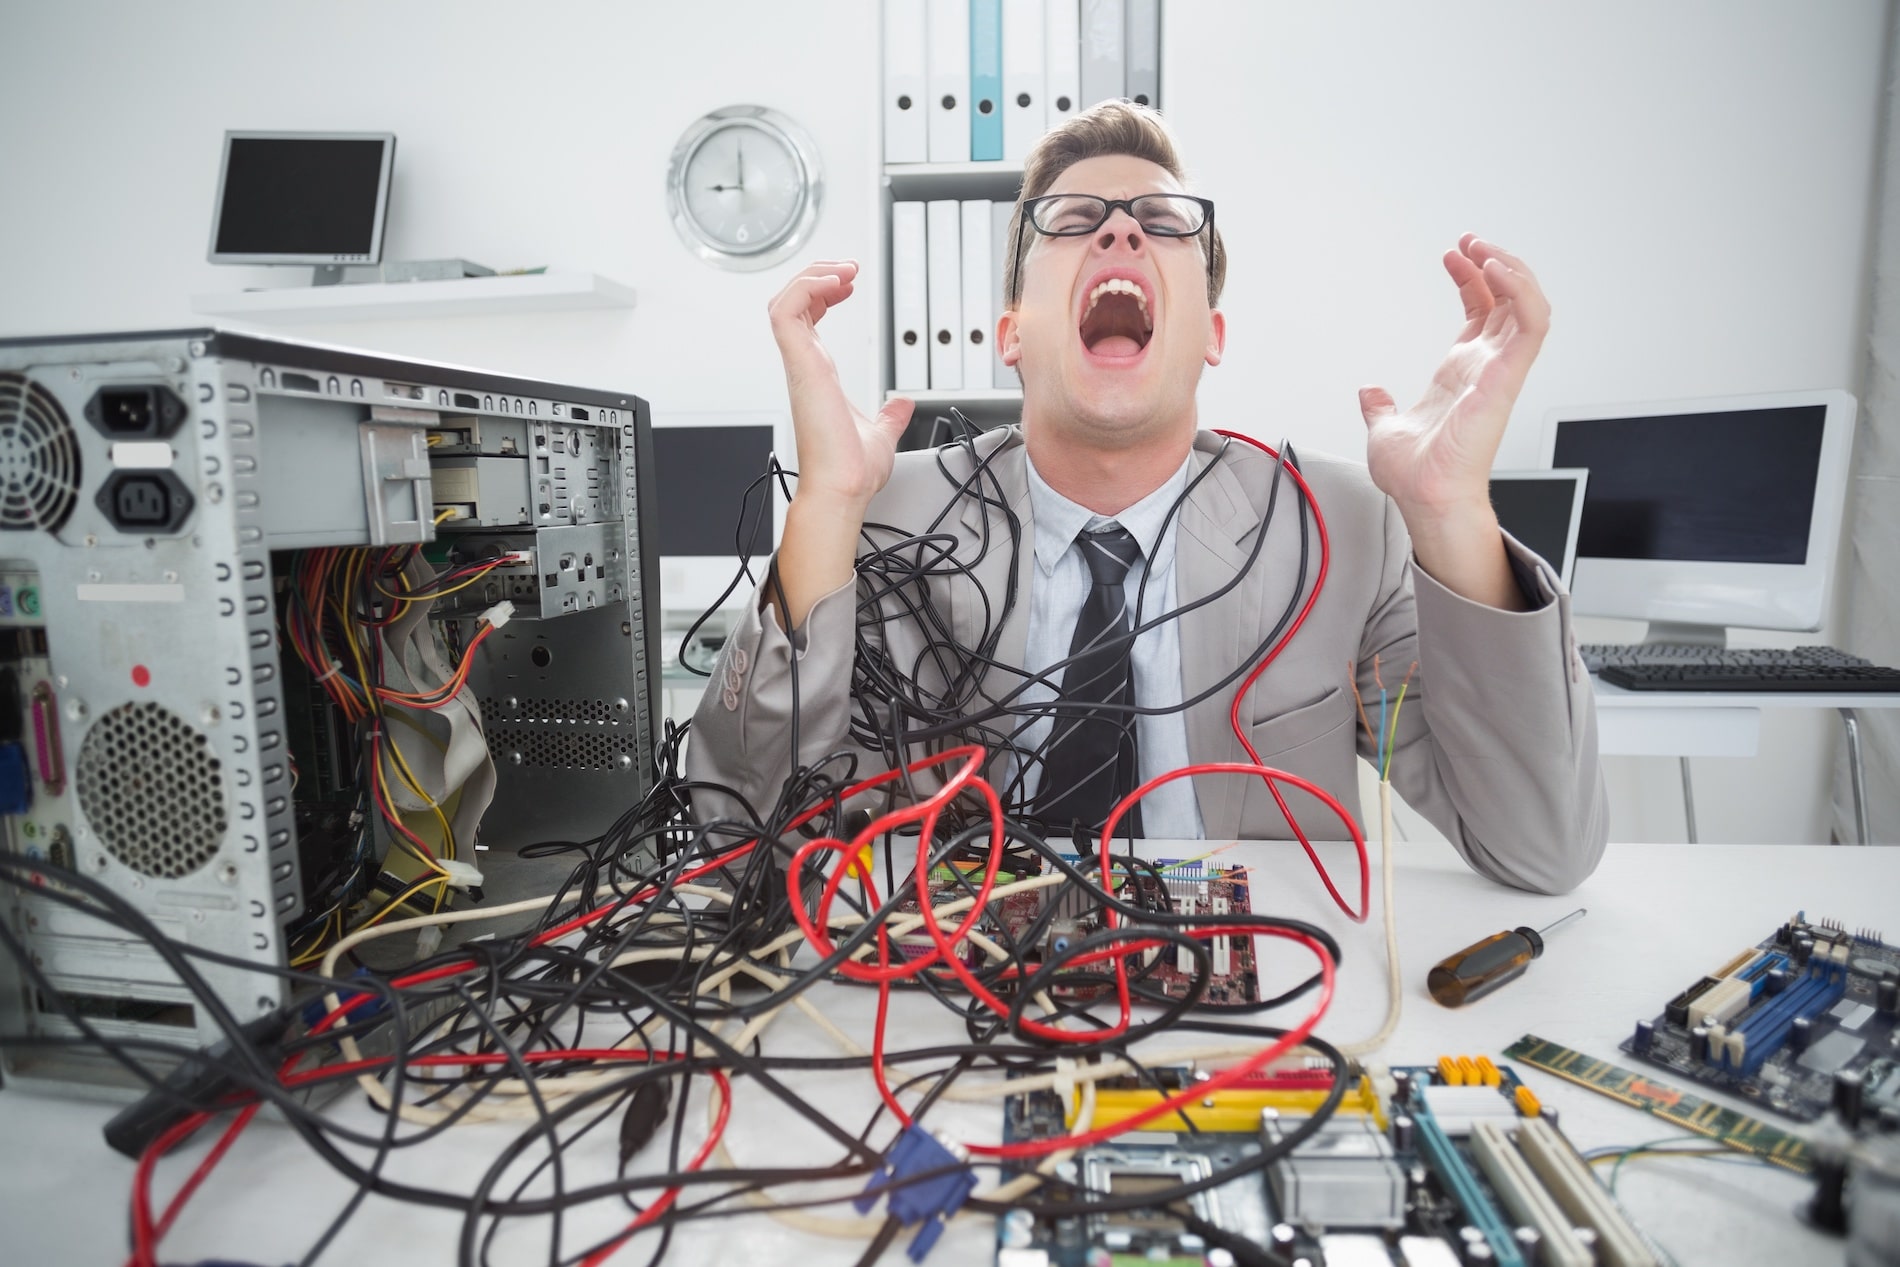 Stressed computer engineer working on broken cables screaming in frustration